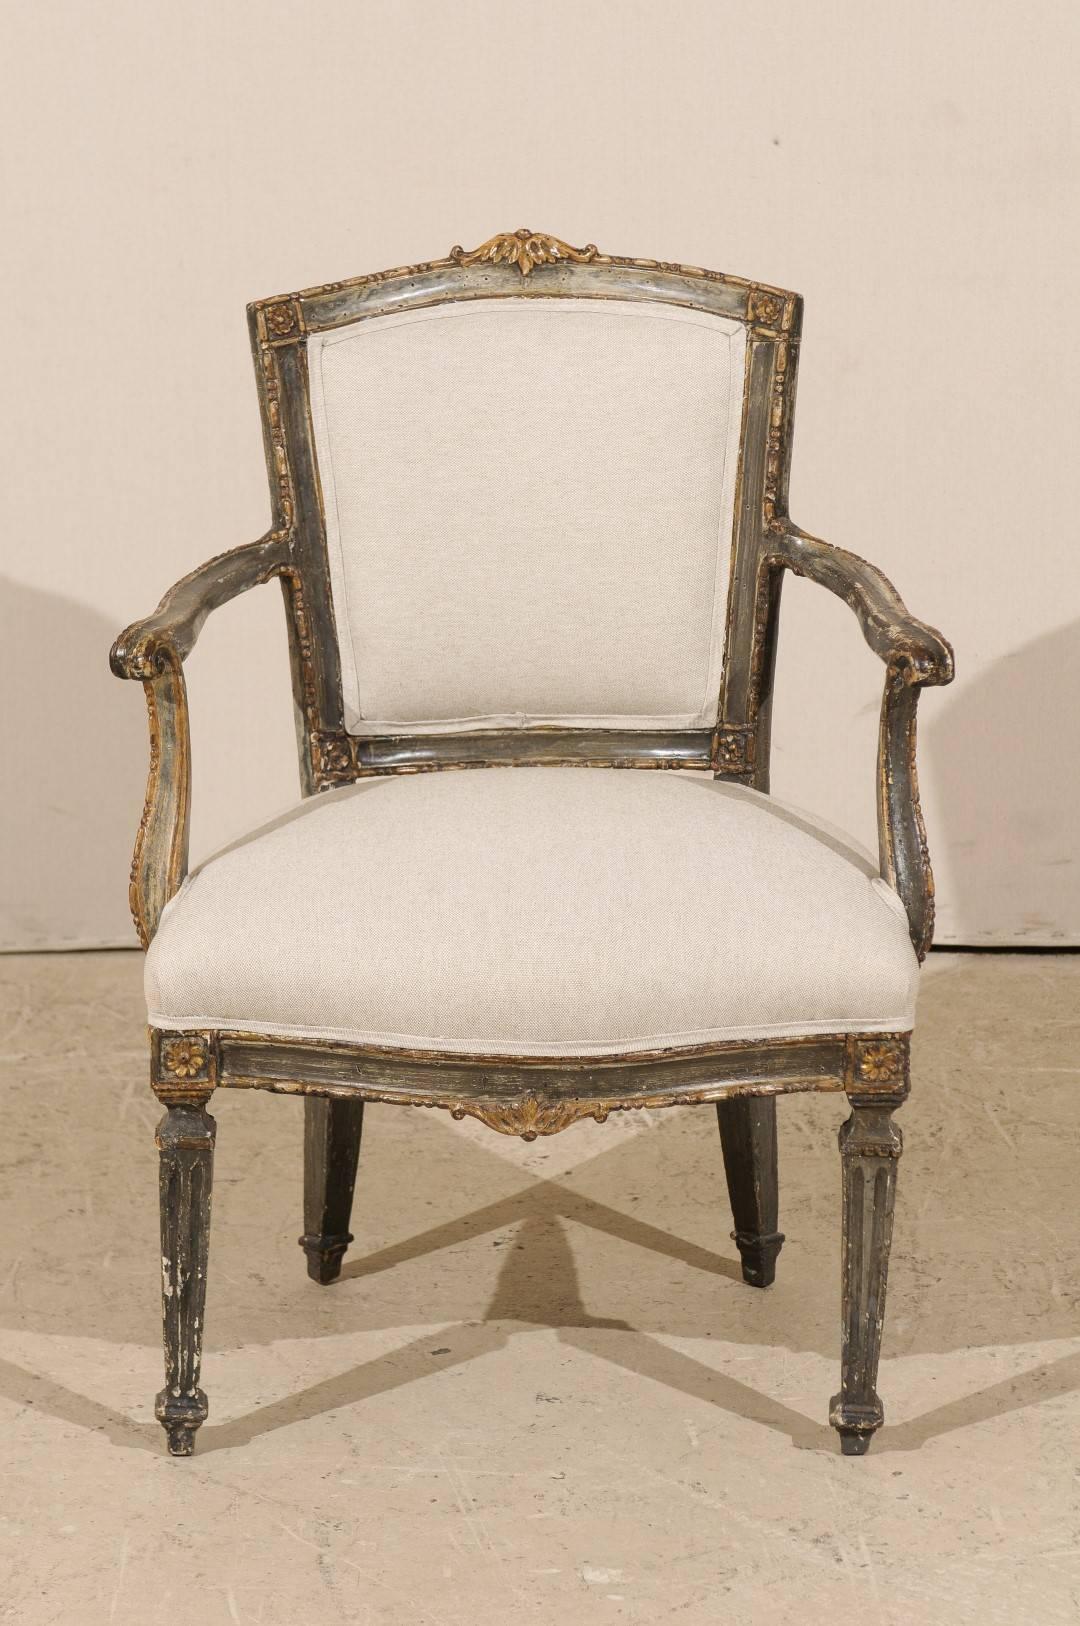 Single Italian Armchair with Richly Carved Wood Details in Brown/Green Color In Good Condition For Sale In Atlanta, GA